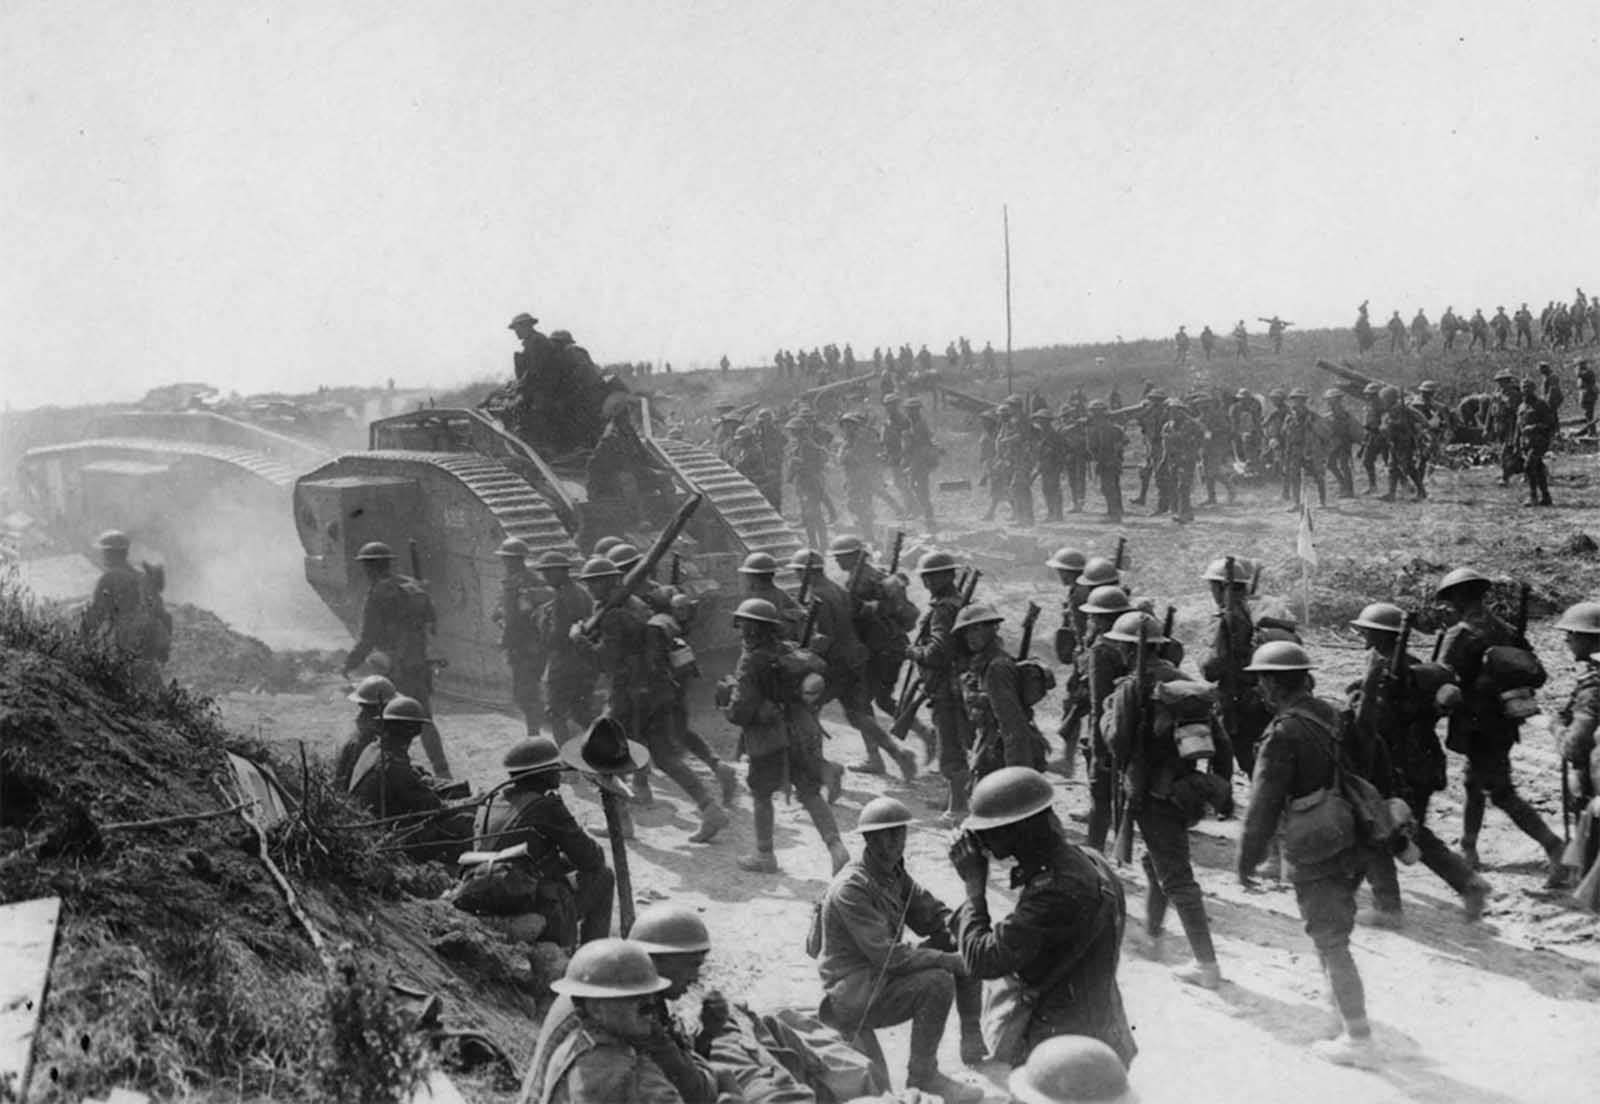 Allied advance on Bapaume, France, ca. 1917. Two tanks are moving towards the left, followed by troops. In the foreground some soldiers are sitting and standing at the roadside. One of them appears to be having a drink. Beside the men is what appears to be a rough wooden cross with an Australian or New Zealand service hat on it. In the background other troops are advancing, moving field guns and mortars